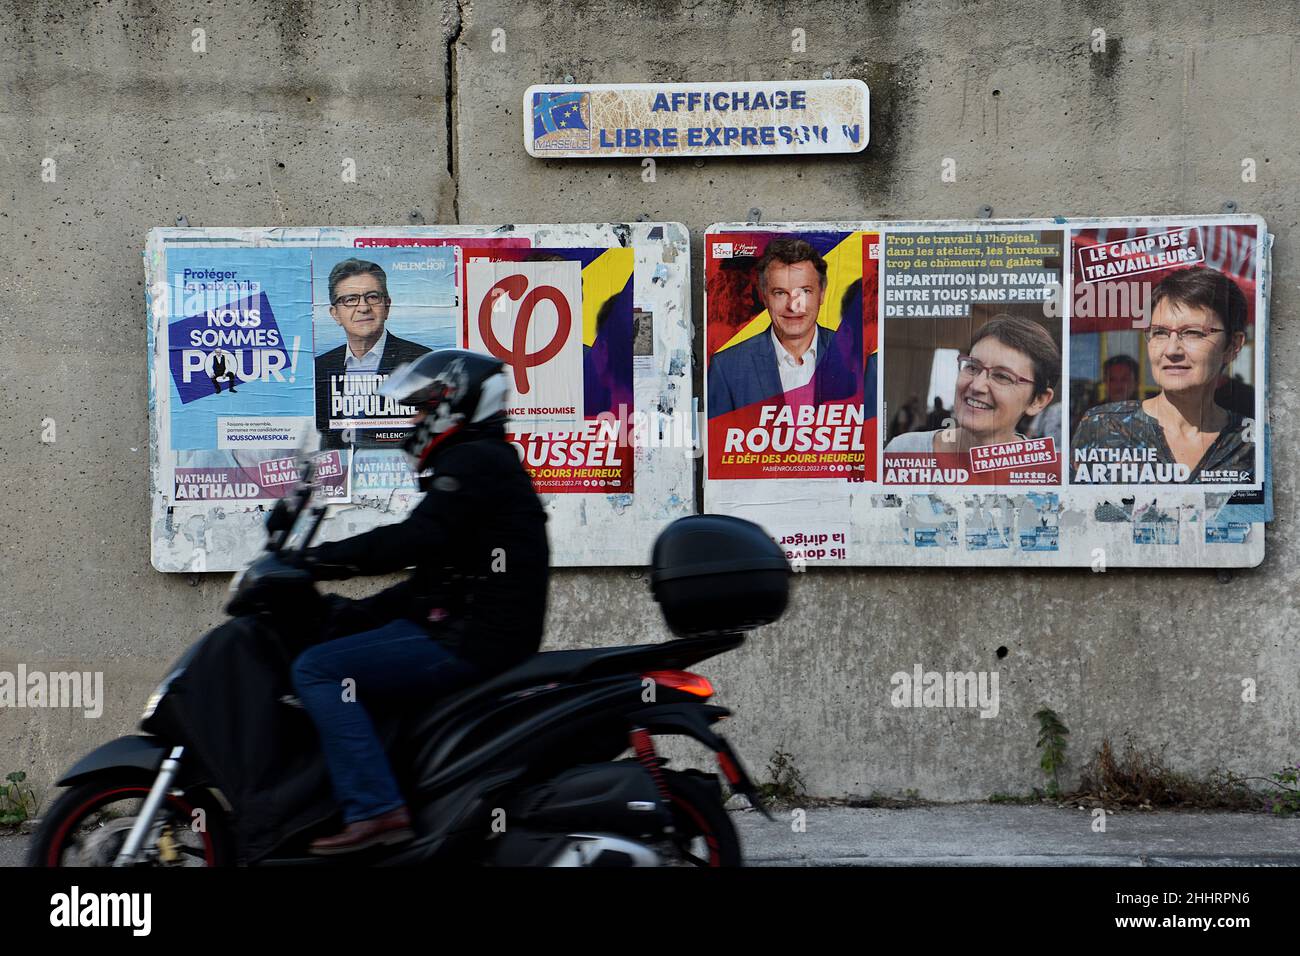 Marseille, France. 25th Jan, 2022. A man on a scooter rides past posters of Jean-Luc Mélenchon (L), Fabien Roussel (C) and Nathalie Arthaud (R) on display.Posters campaign of Nathalie Arthaud, Fabien Roussel, Philippe Poutou and Jean-Luc Mélenchon, candidates for the French presidential elections of 2022. (Photo by Gerard Bottino/SOPA Images/Sipa USA) Credit: Sipa USA/Alamy Live News Stock Photo